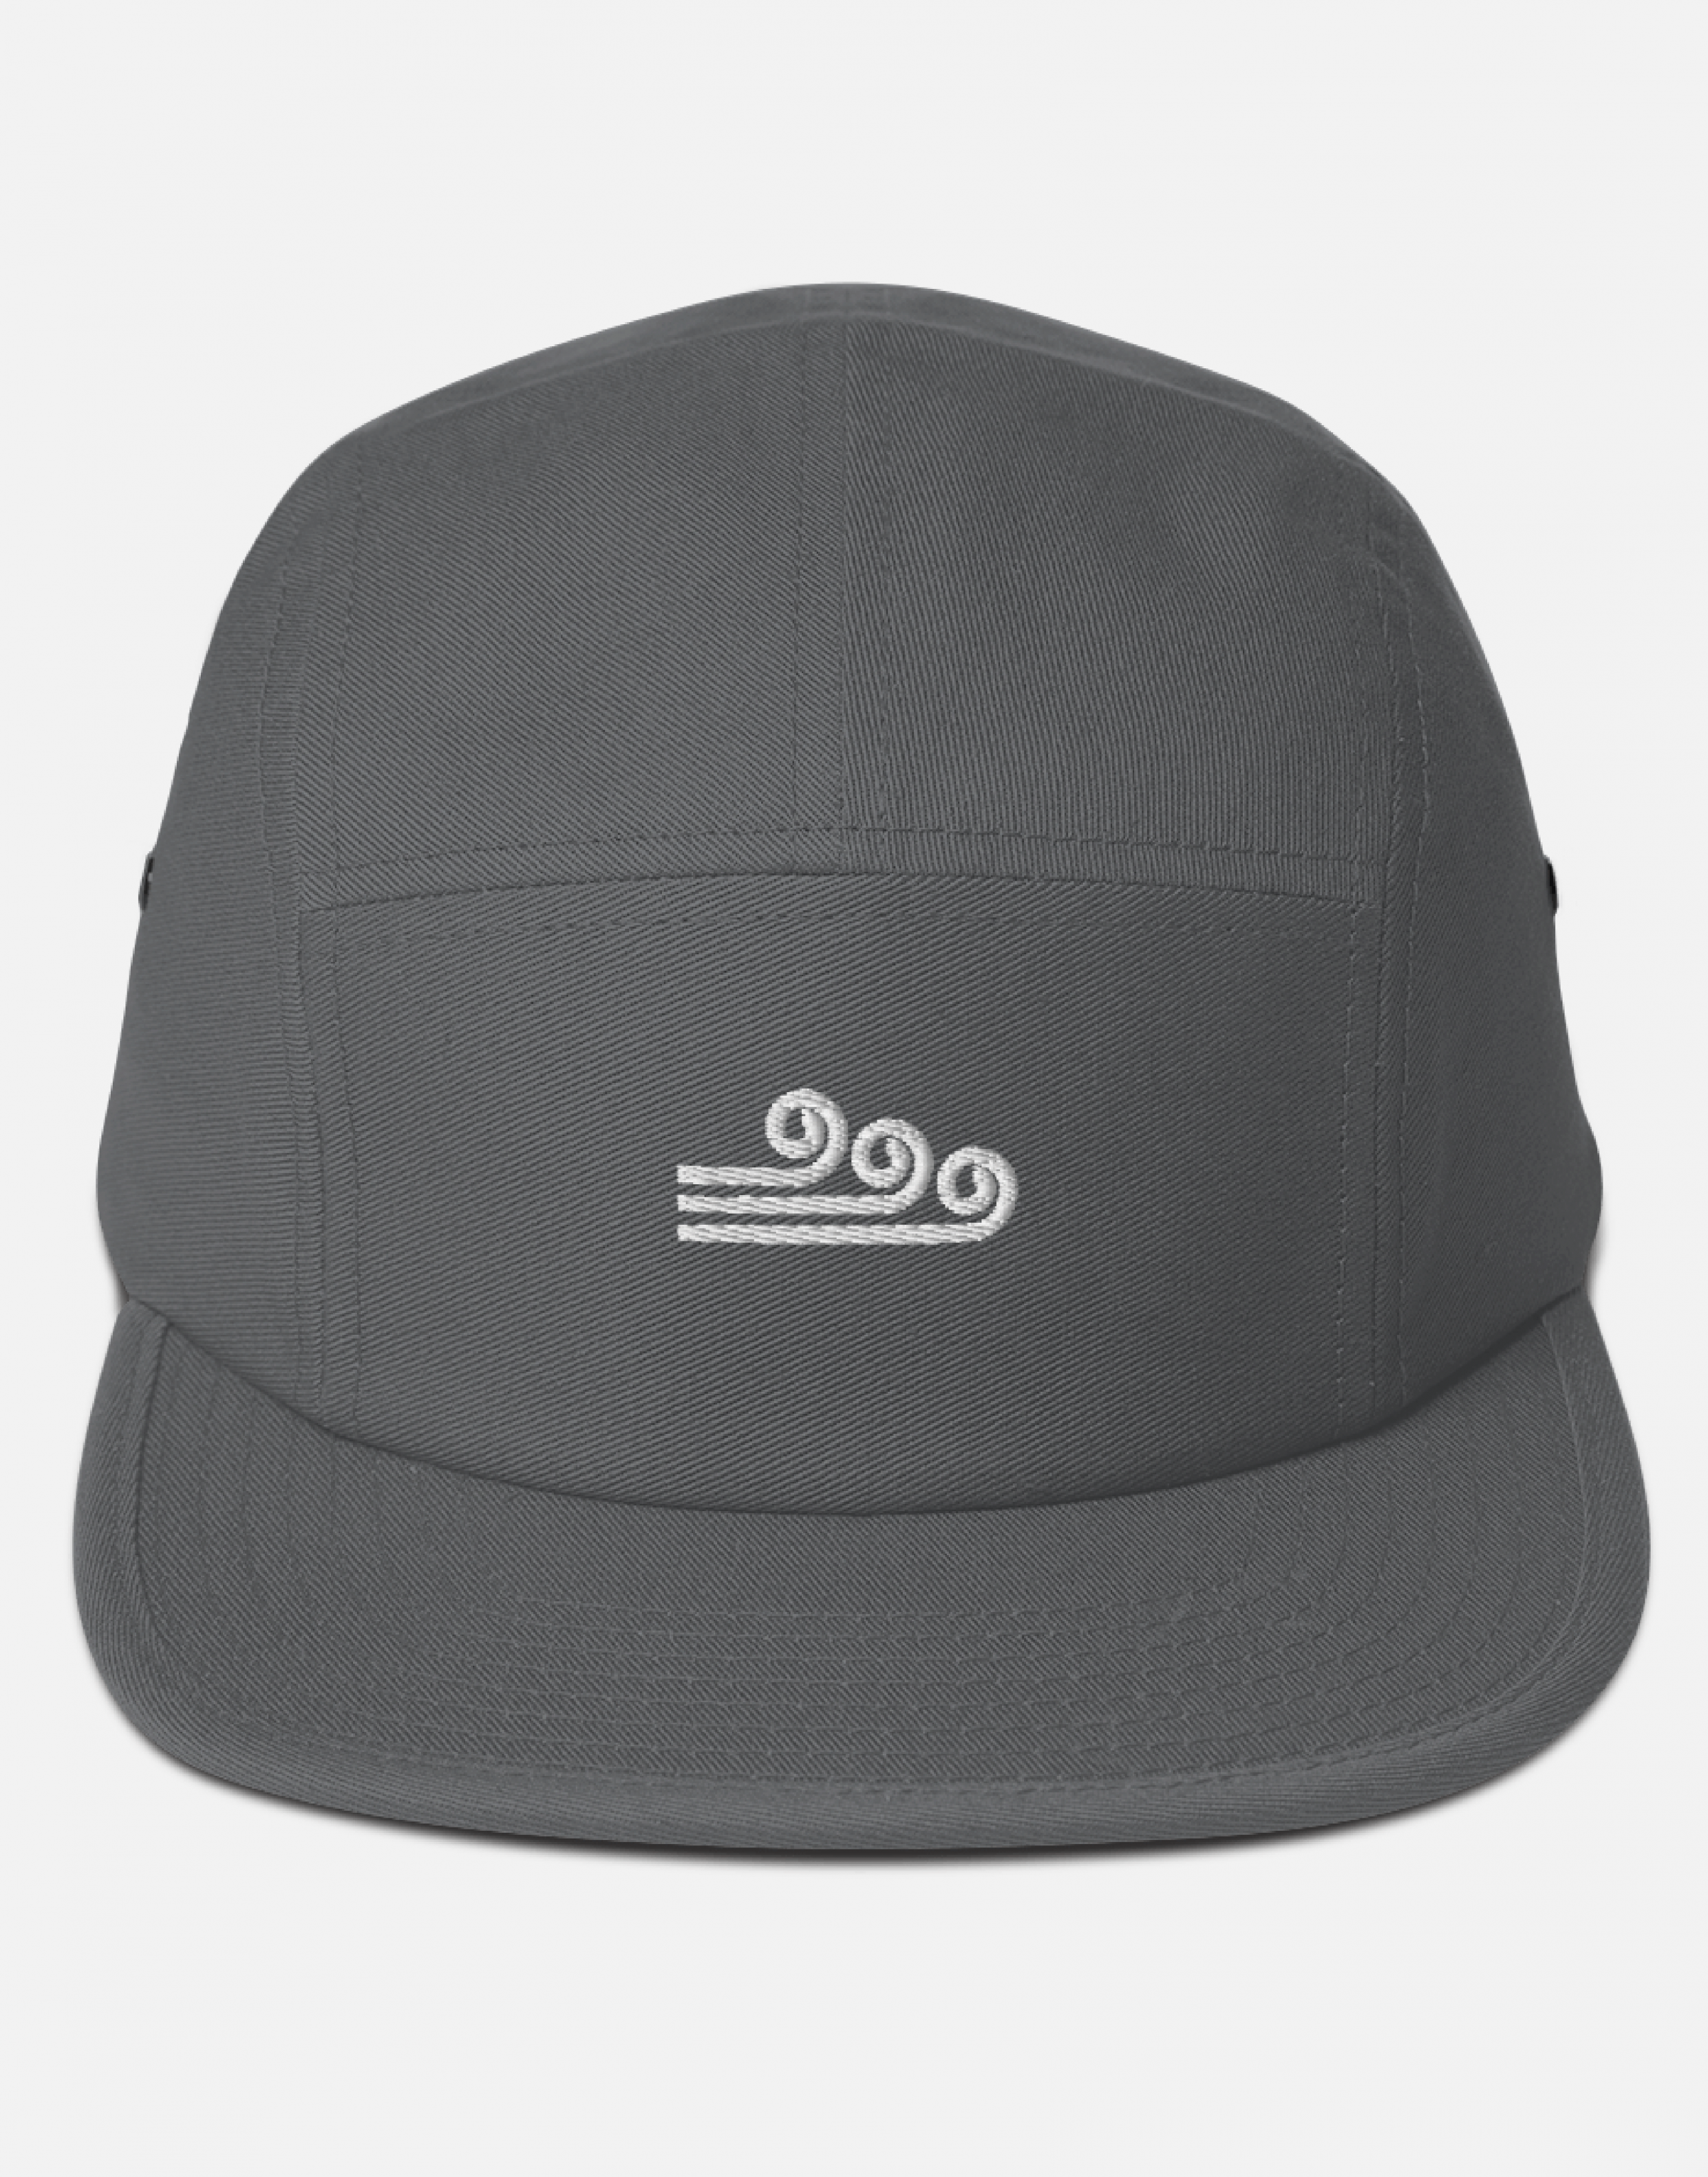 Gray 5 panel camper hat with Swellone logo.